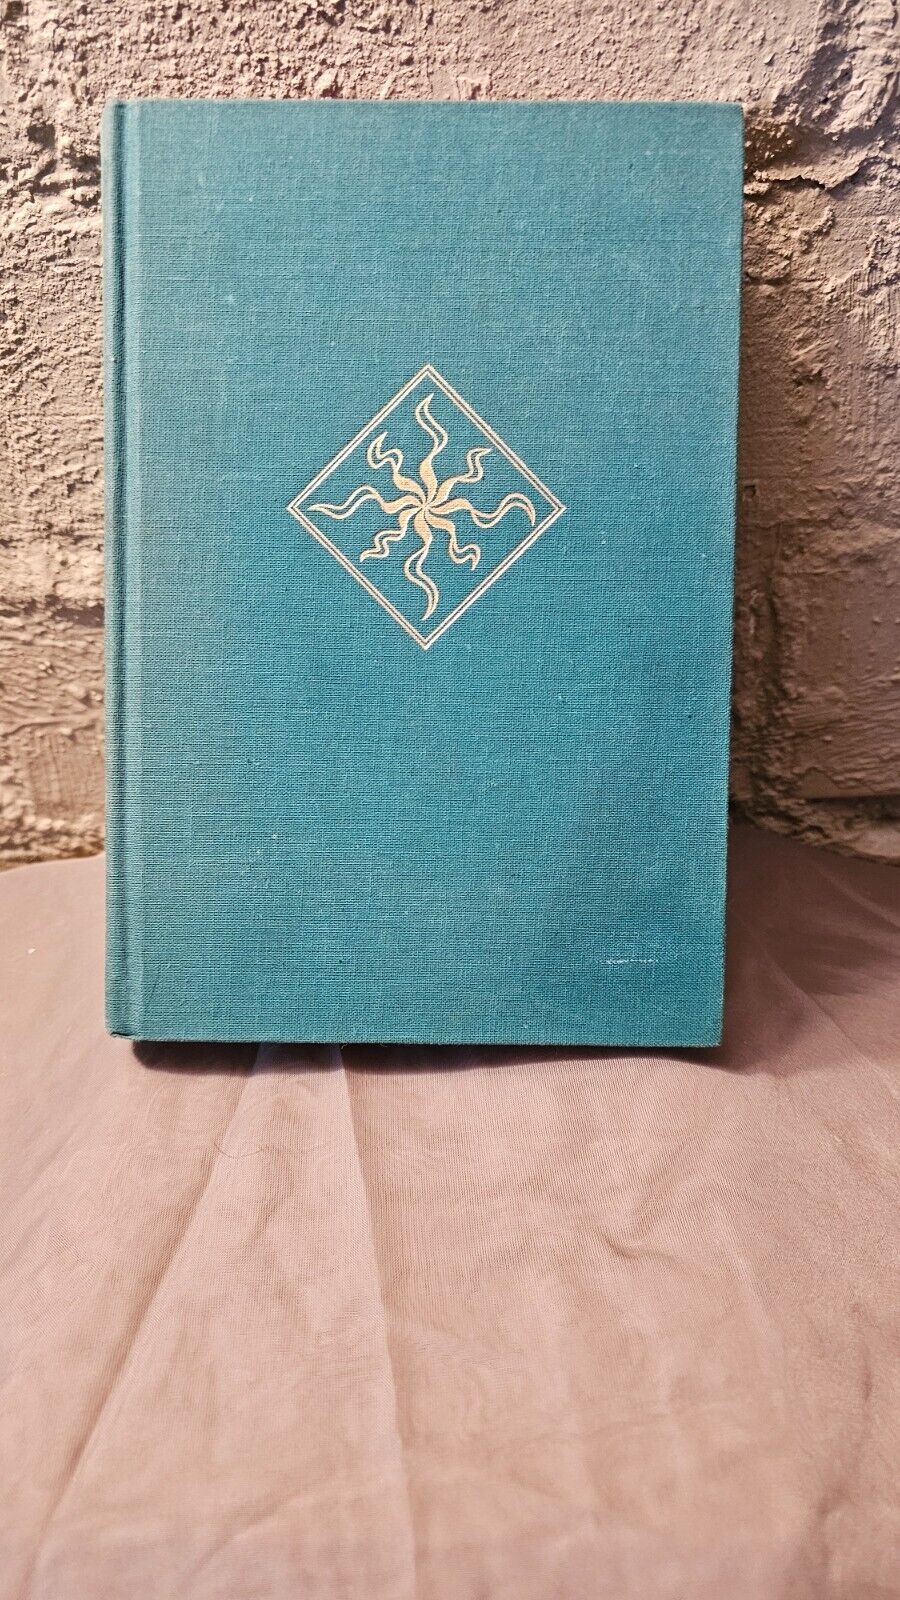 J.R.R. Tolkien The Silmarillion HC 1977 First American Edition Map Intact